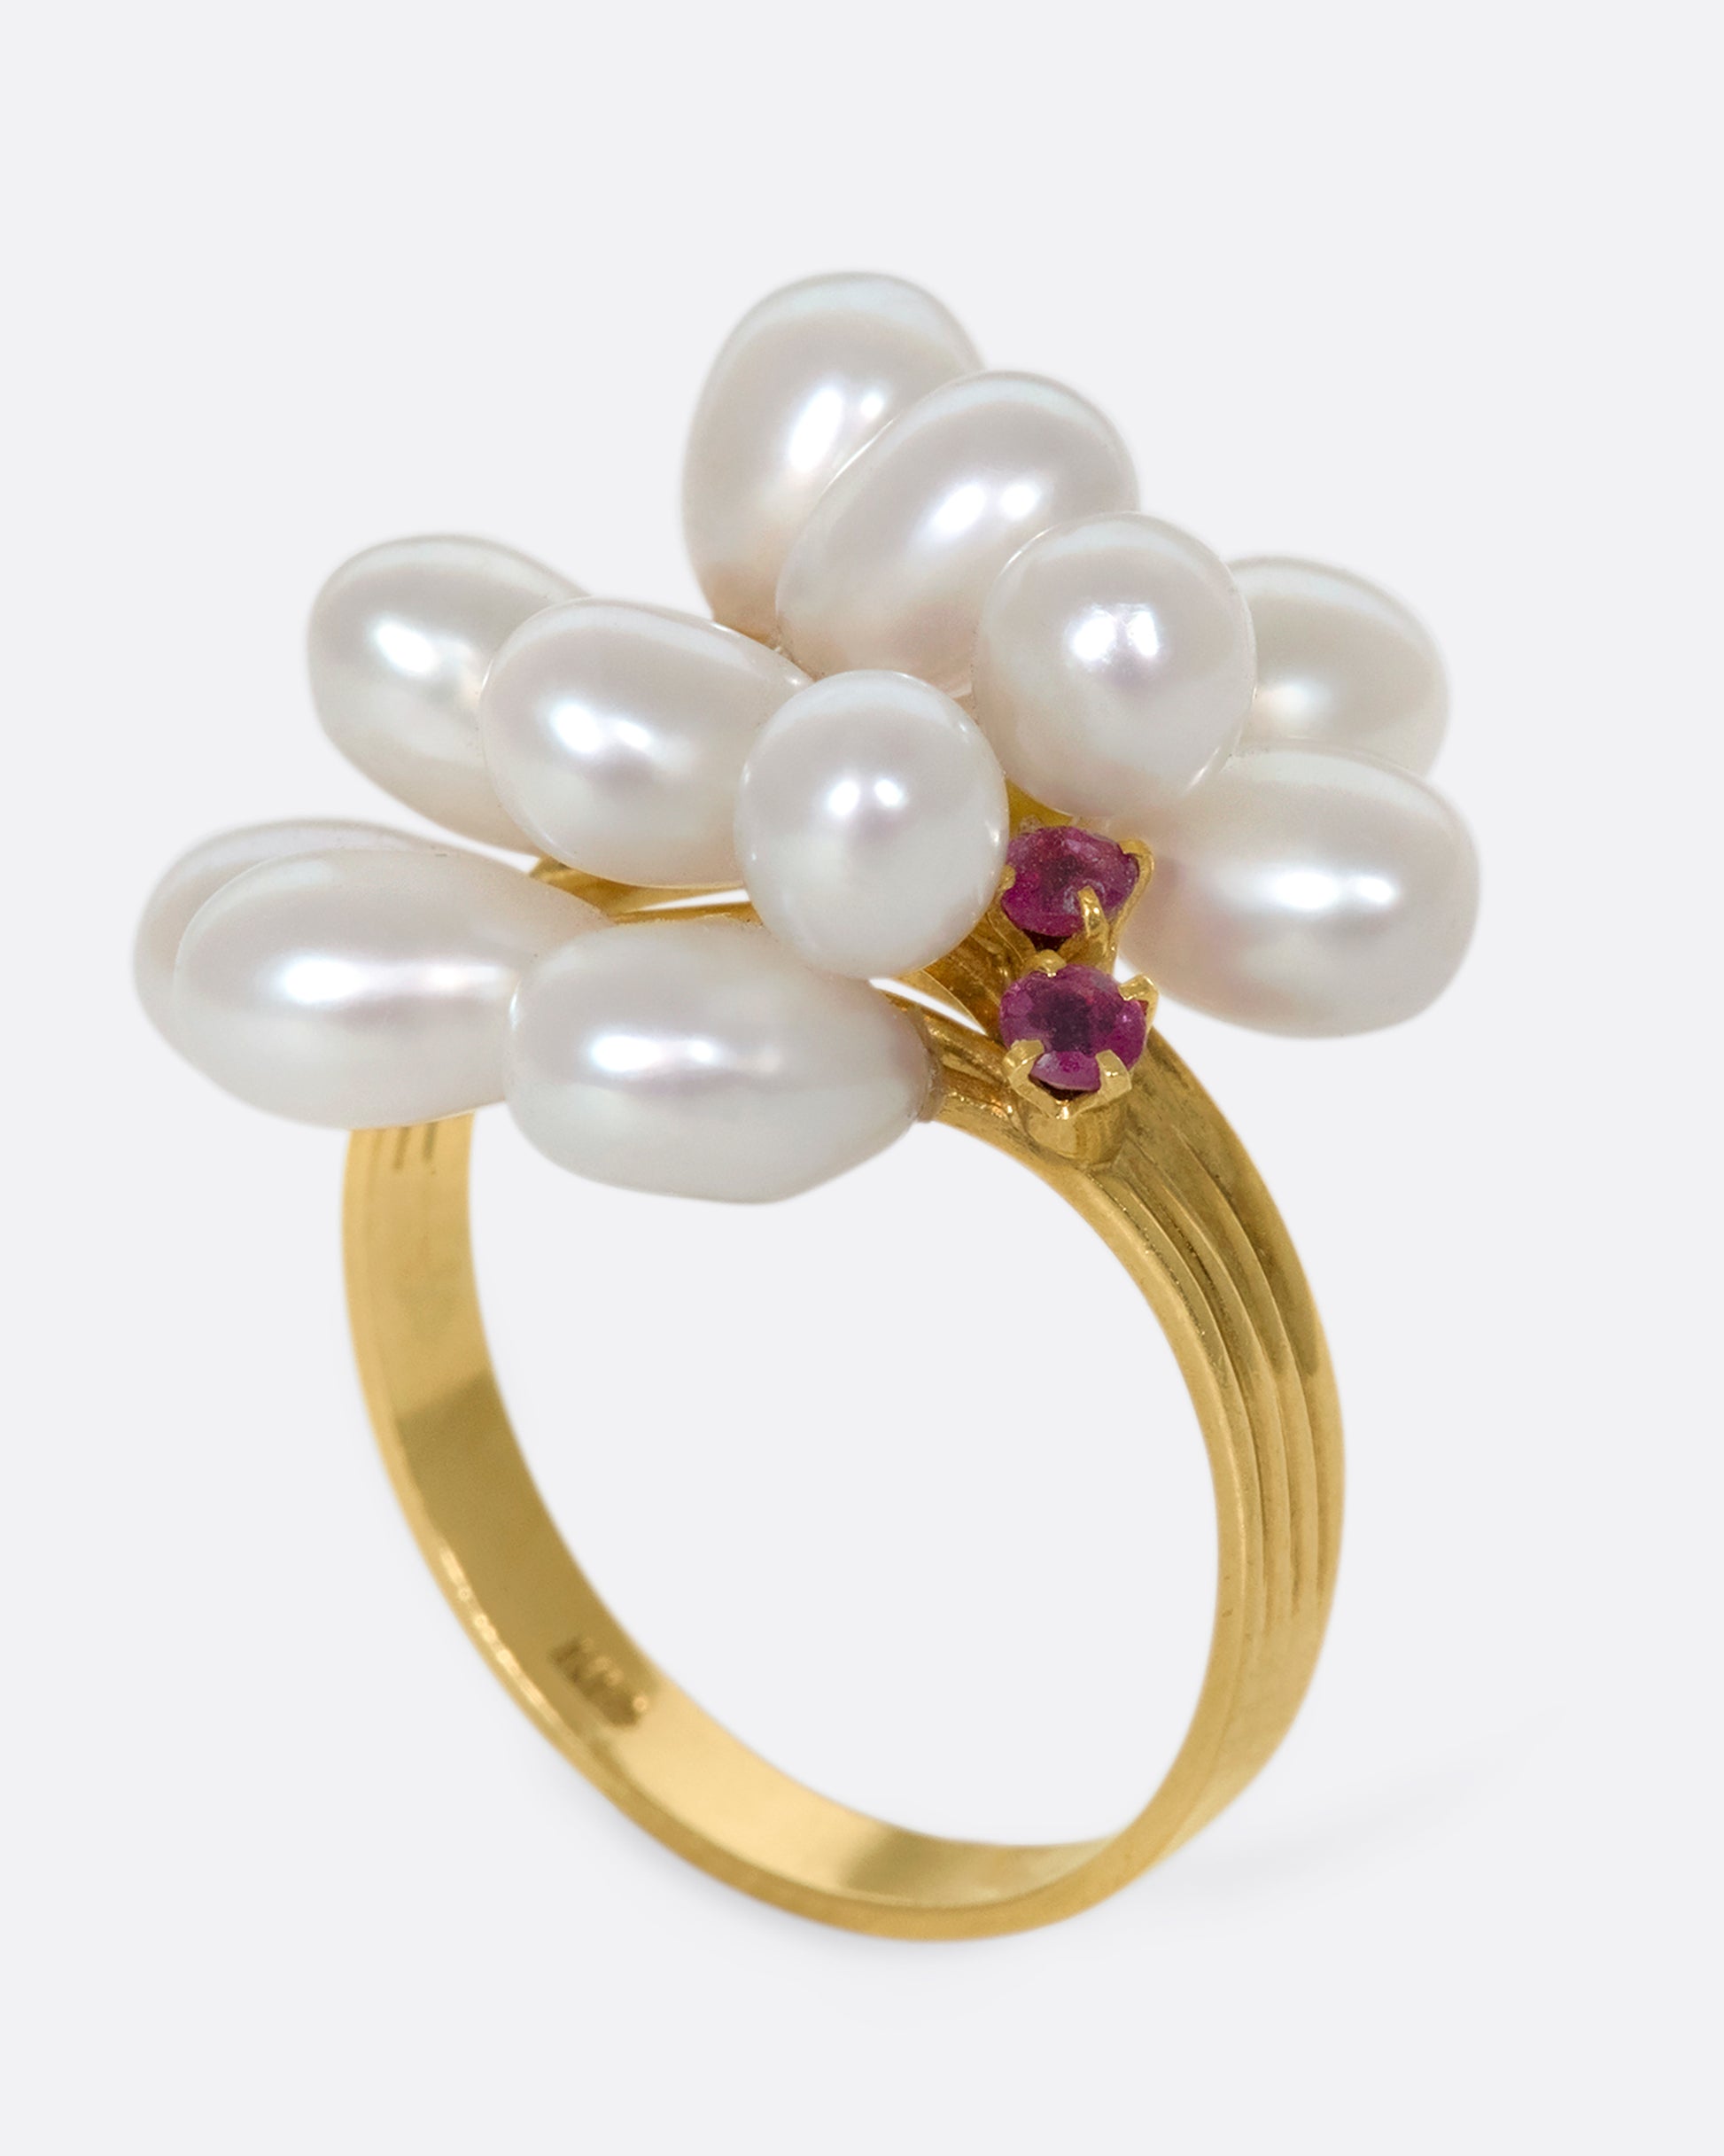 A 14k gold and pearl pussy willow ring with pink sapphire accents. Silky pearls wave across your finger like blossoms, adding beautiful dimension to your finger.